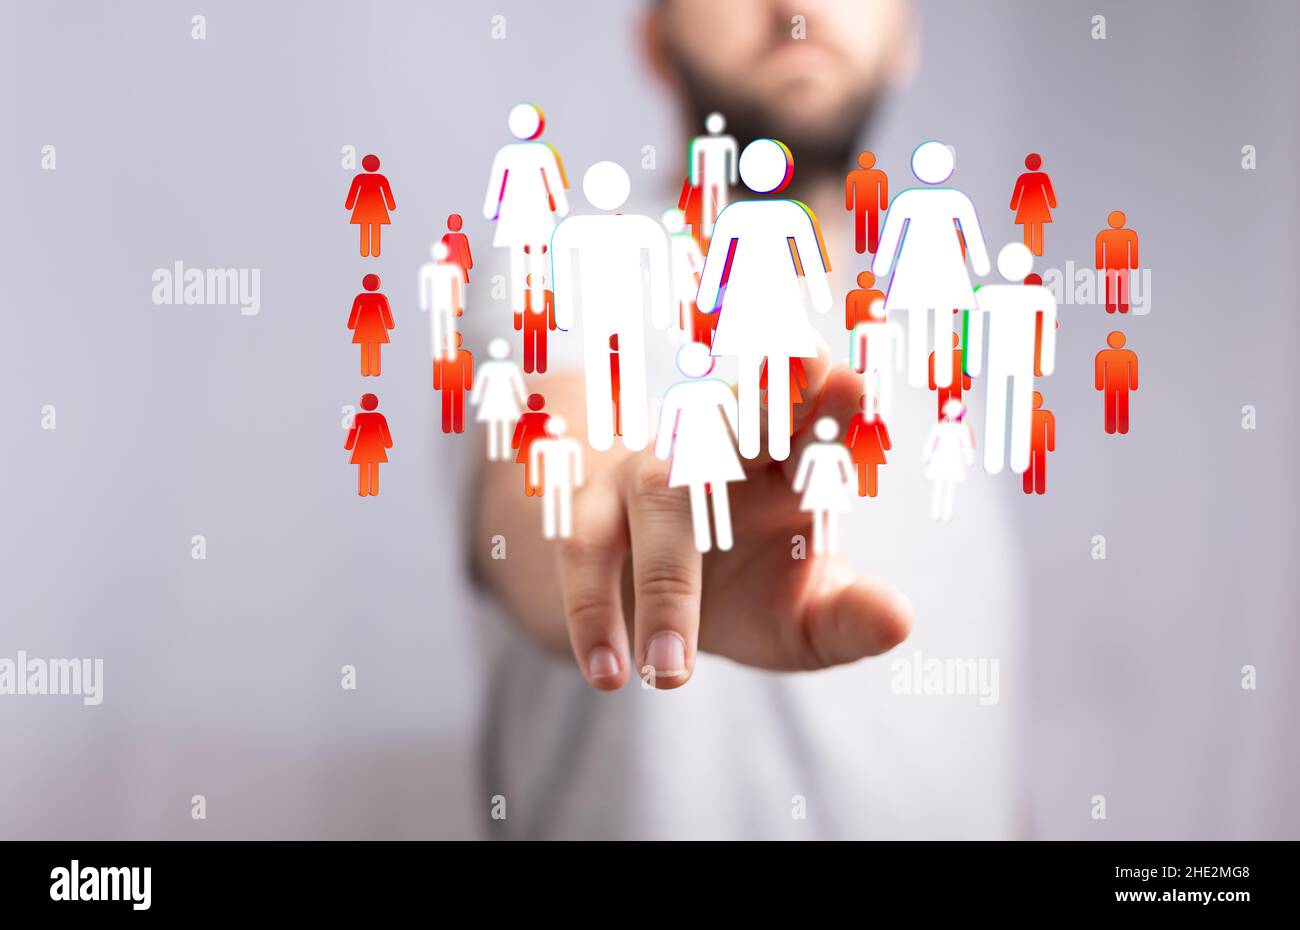 Businessman tapping on a floating render of gendered profile icons-network, connection concept Stock Photo